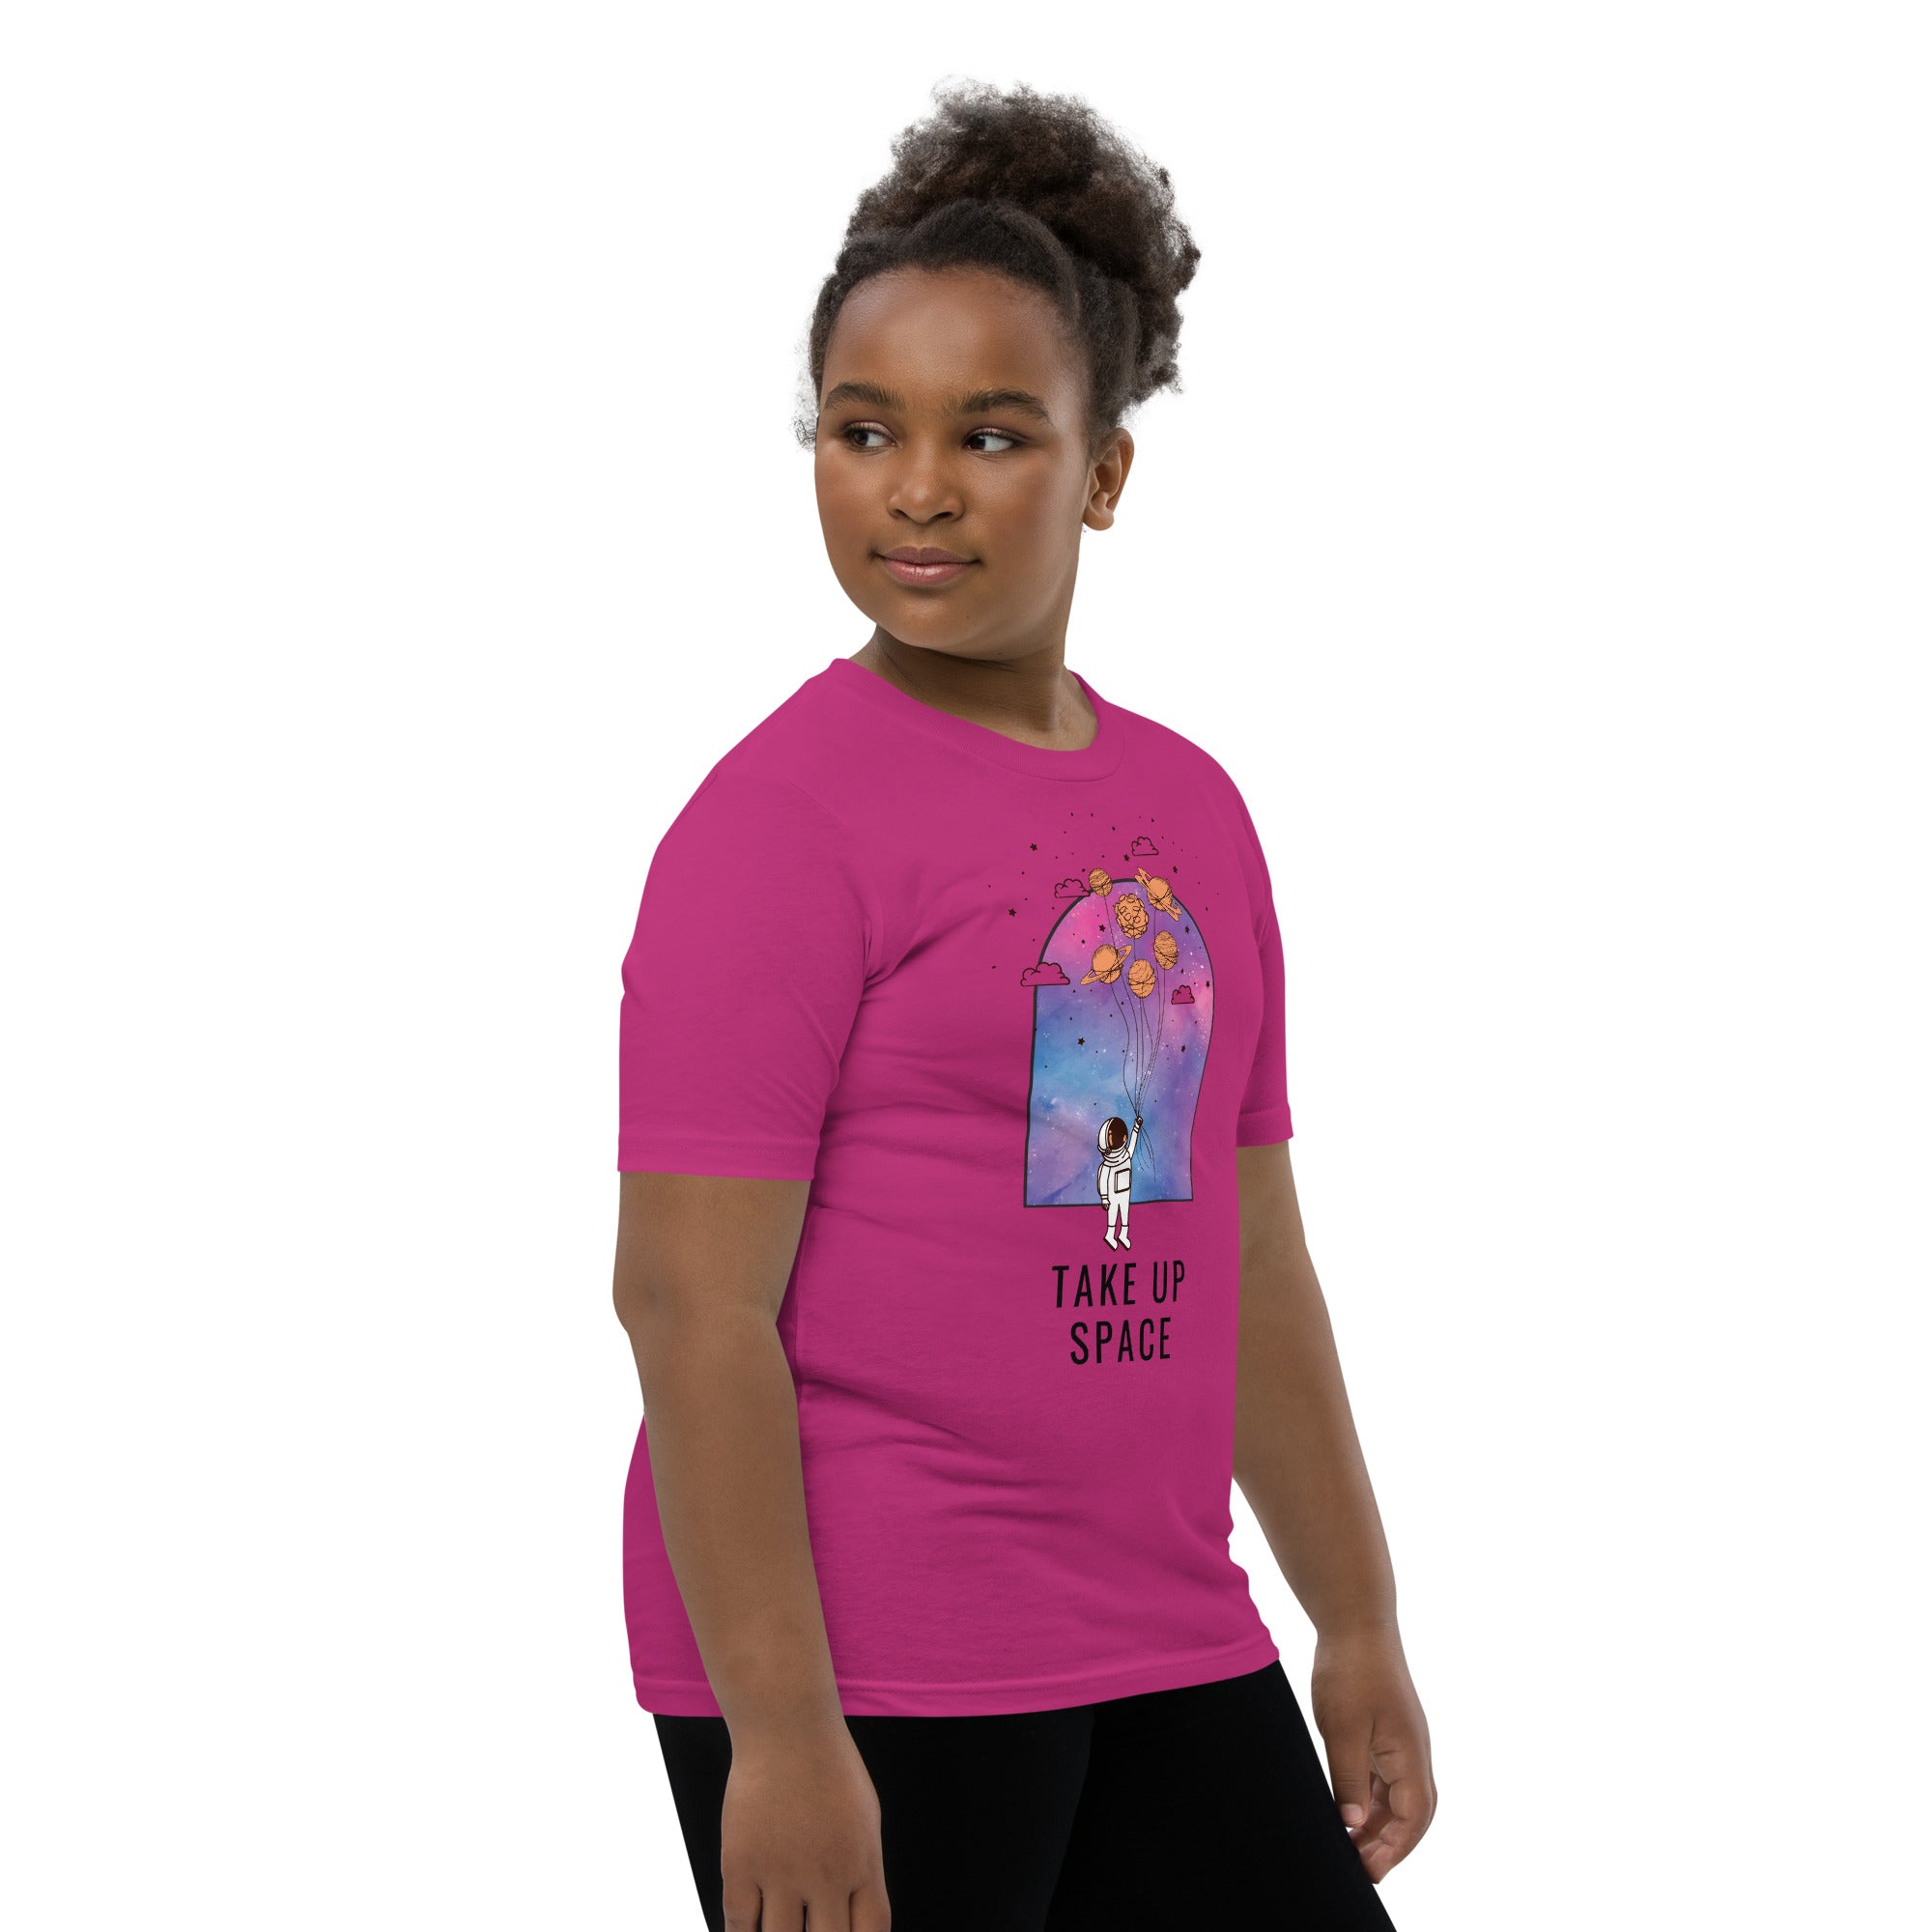 Take Up Space - Youth Short Sleeve T-Shirt